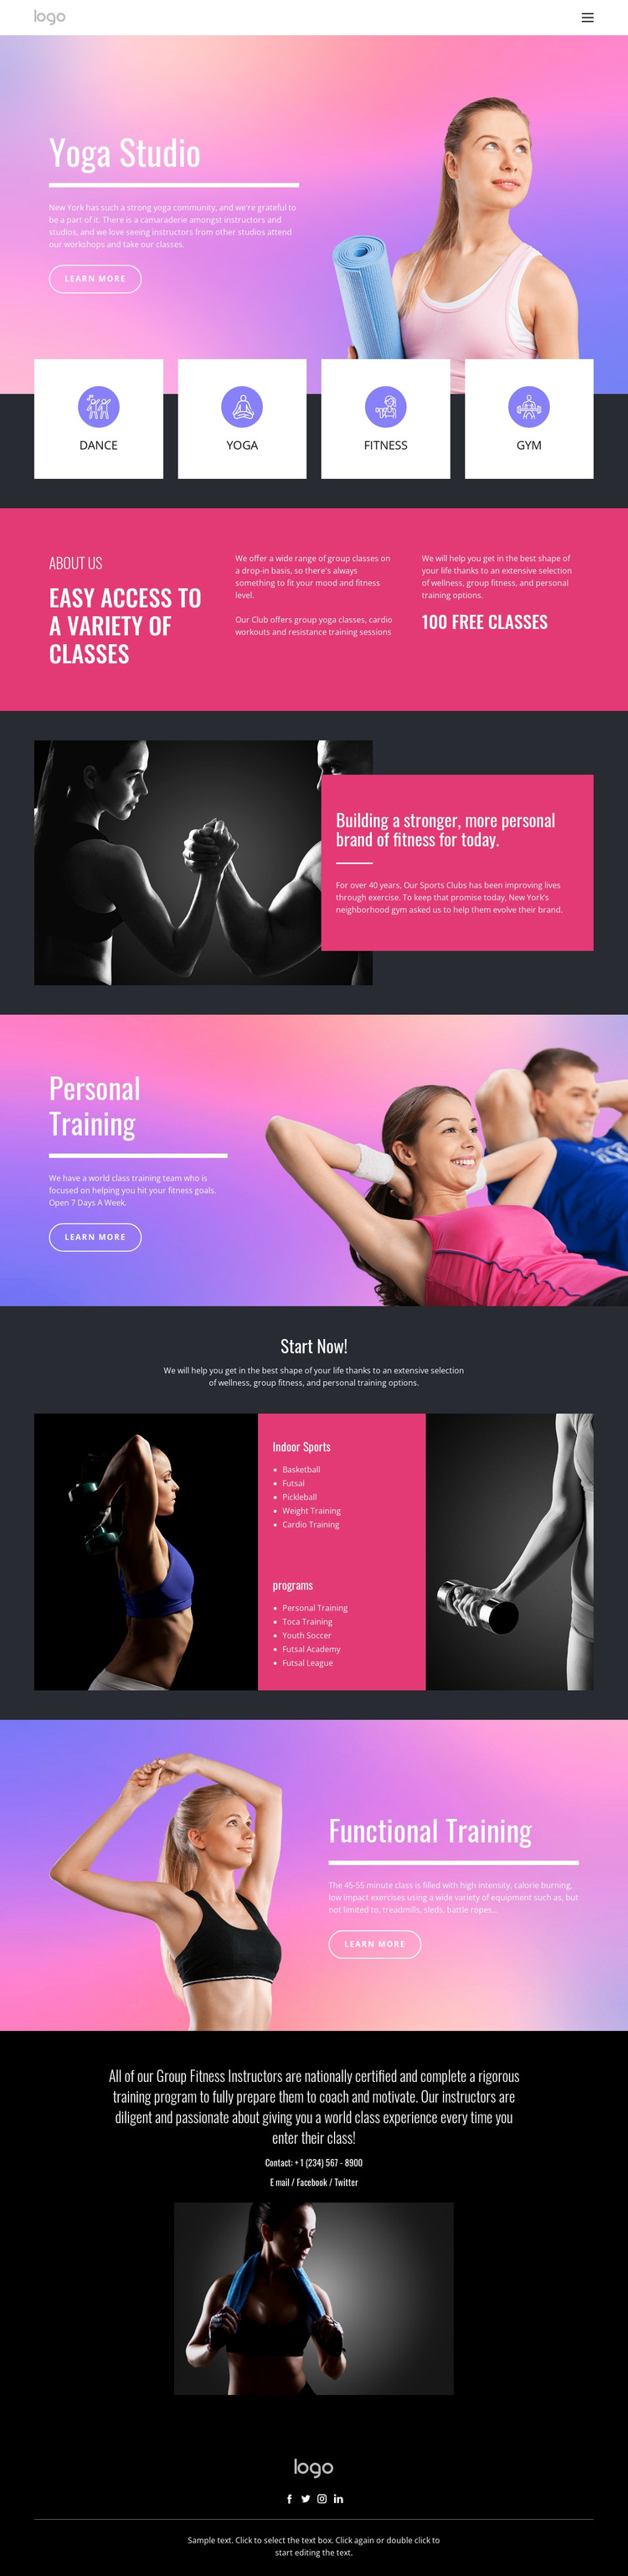 Wellness practice for self-inquiry HTML5 Template